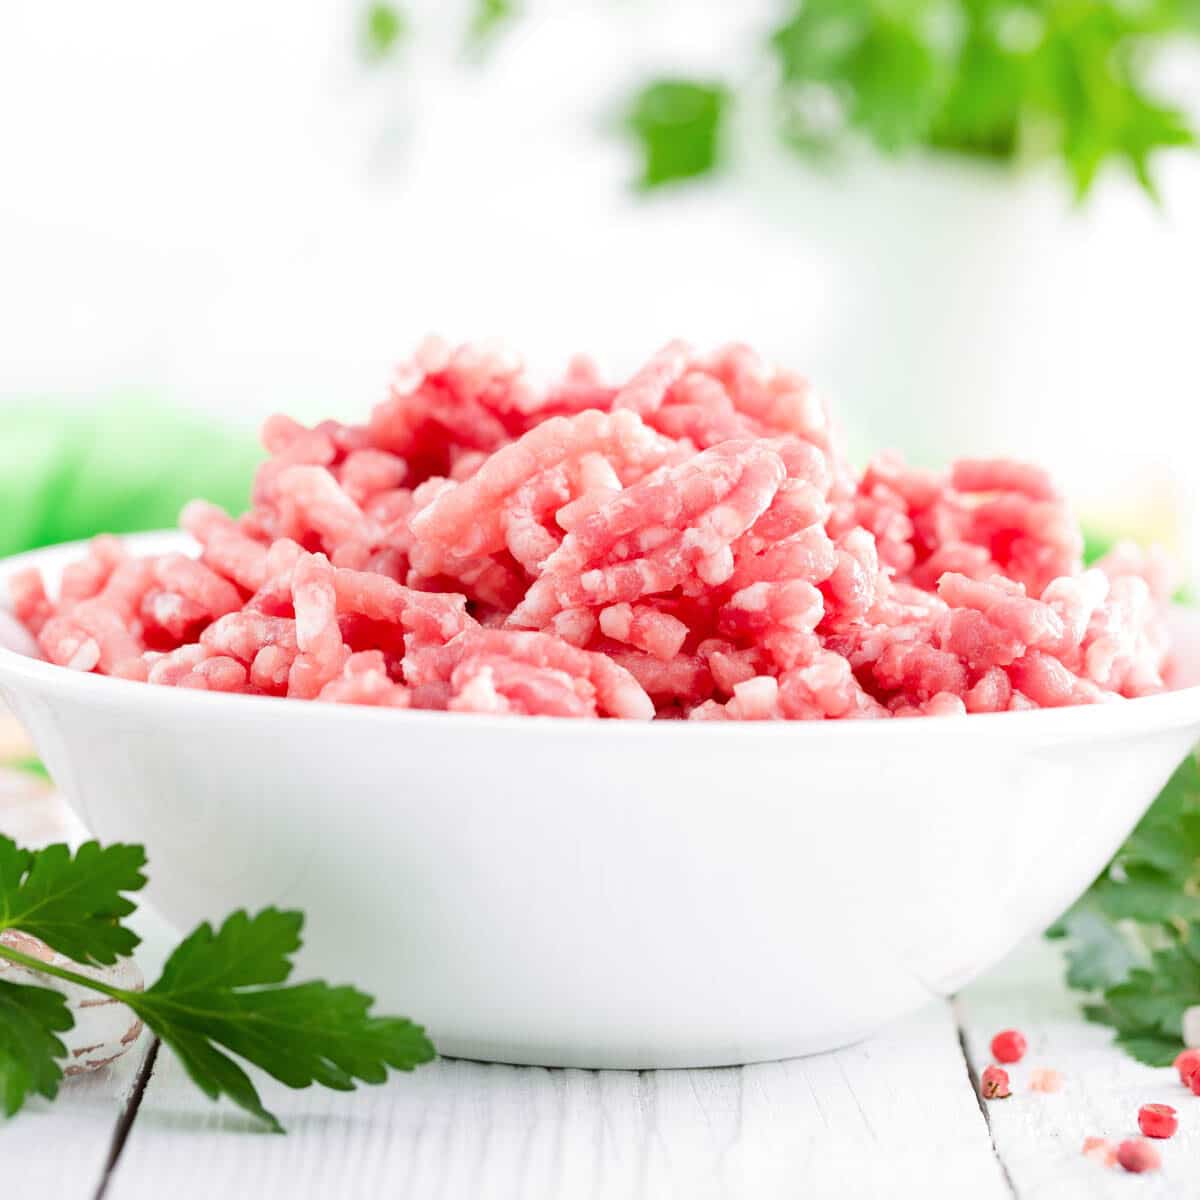 Raw ground pork in a white bowl with sprigs of green herbs.